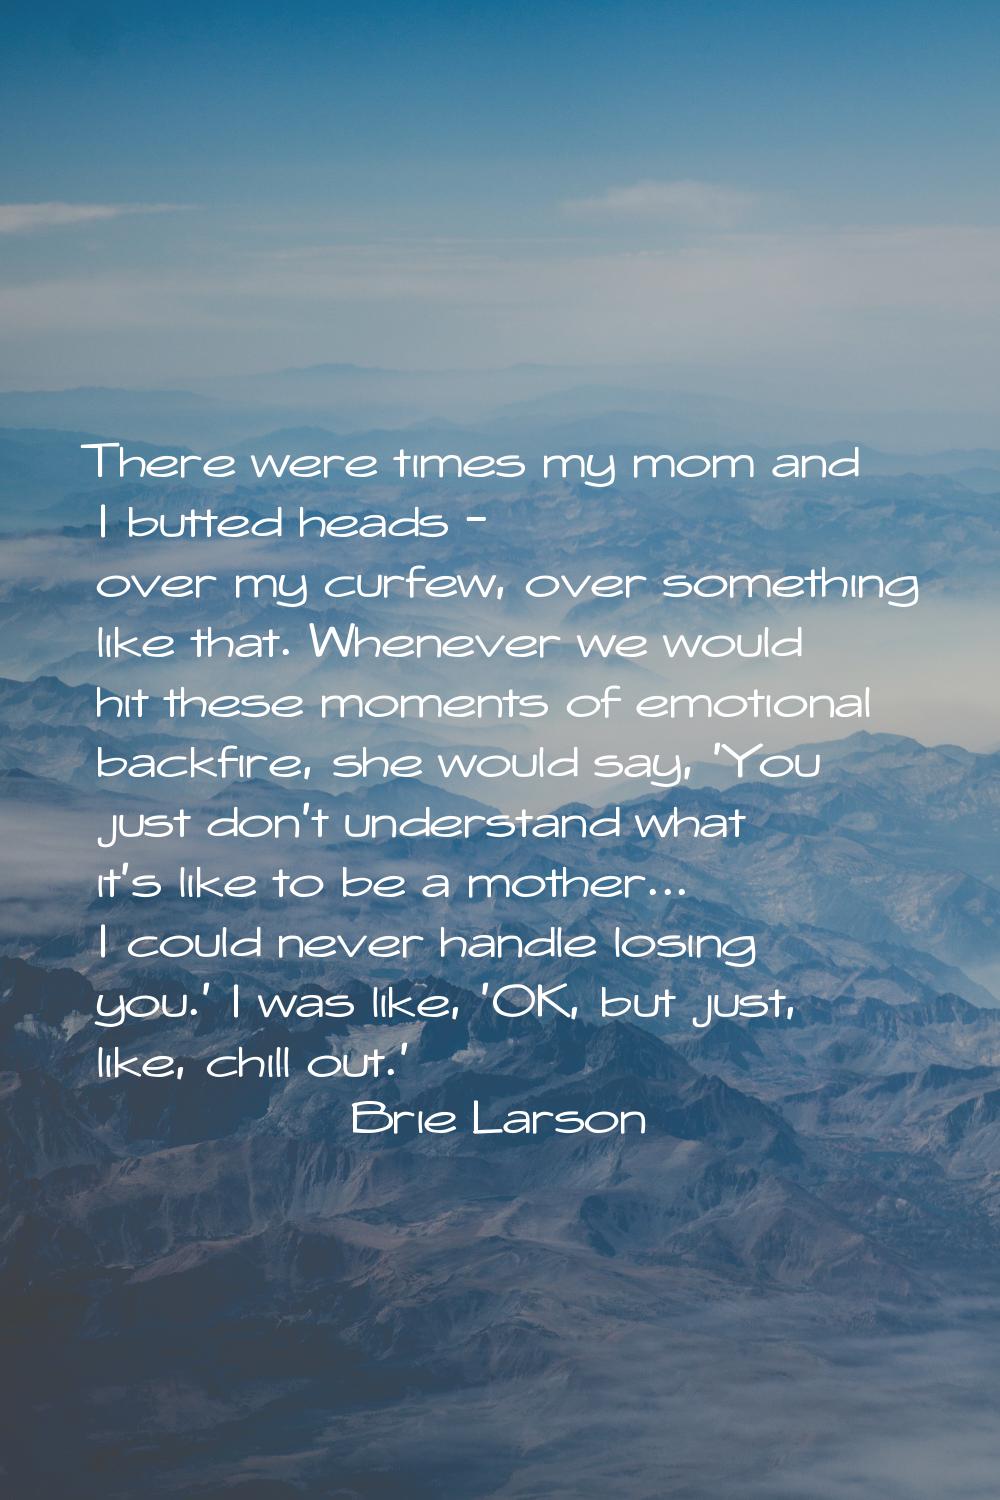 There were times my mom and I butted heads - over my curfew, over something like that. Whenever we 